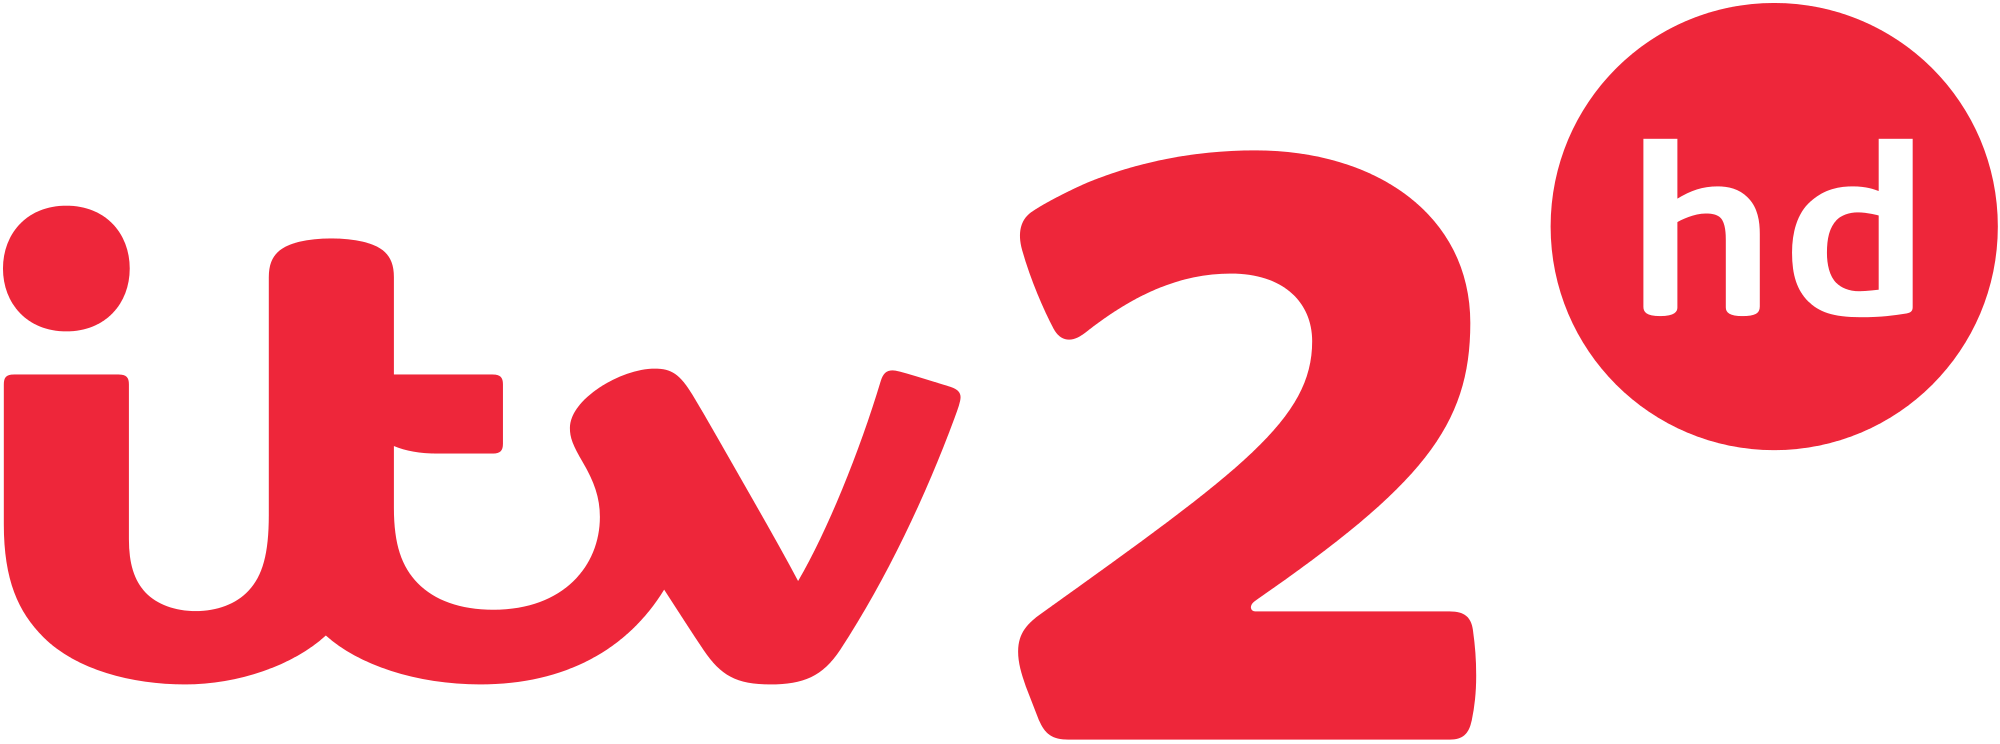 Itv2 Hd Logo 2013 Svg.png - Itv2, Transparent background PNG HD thumbnail